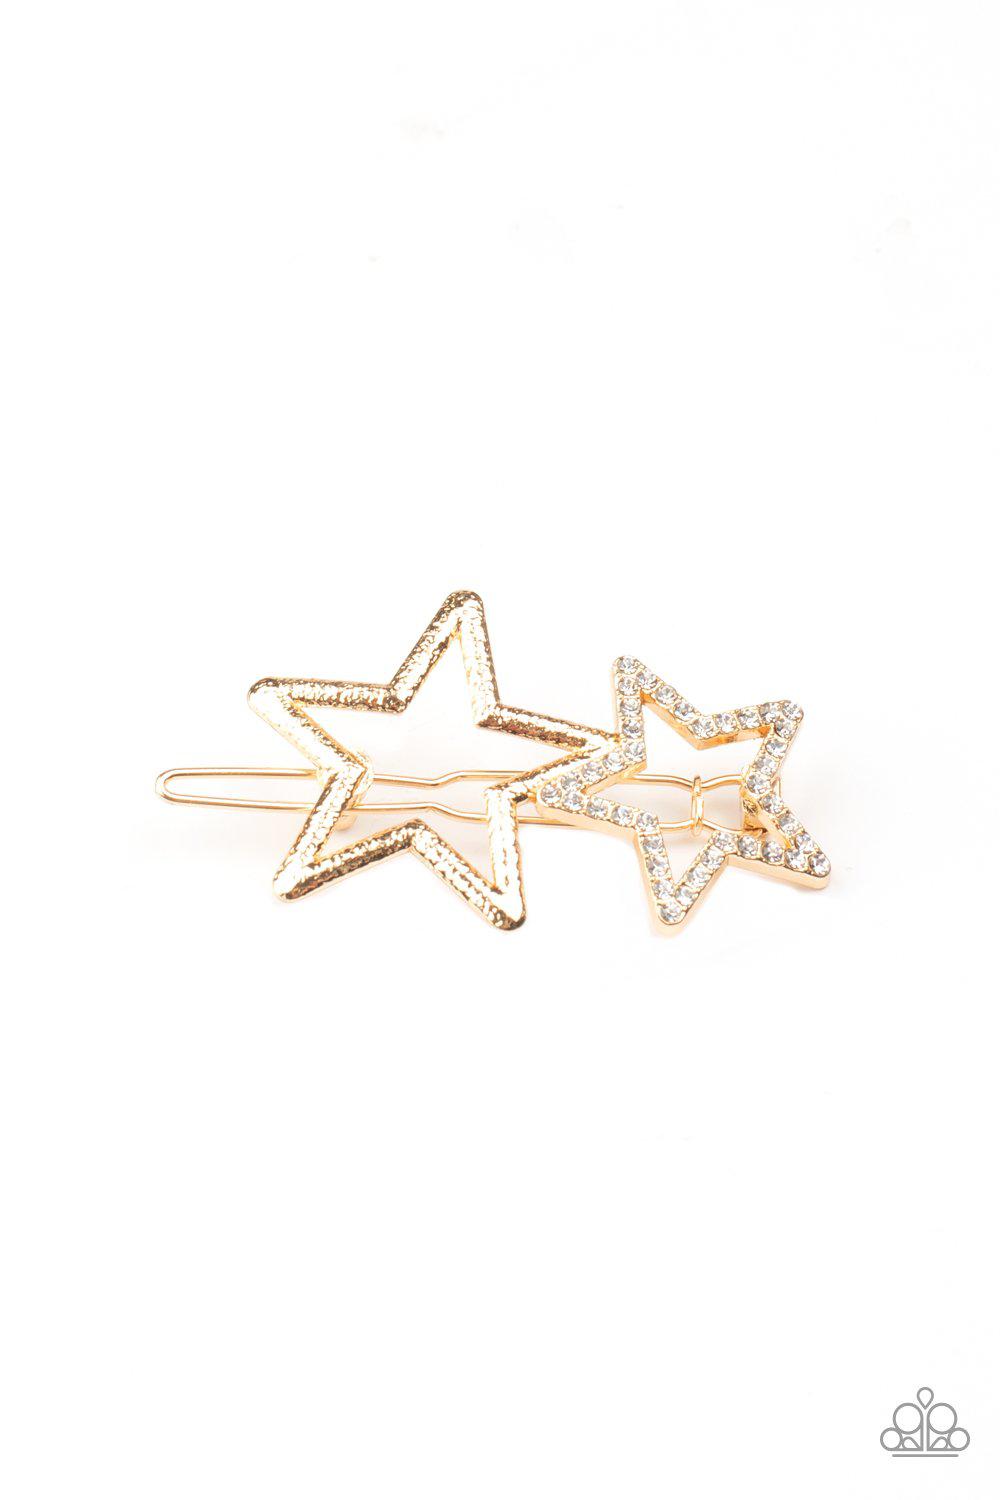 Let&#39;s Get This Party STAR-ted! Gold Rhinestone Hair Pin - Paparazzi Accessories-CarasShop.com - $5 Jewelry by Cara Jewels